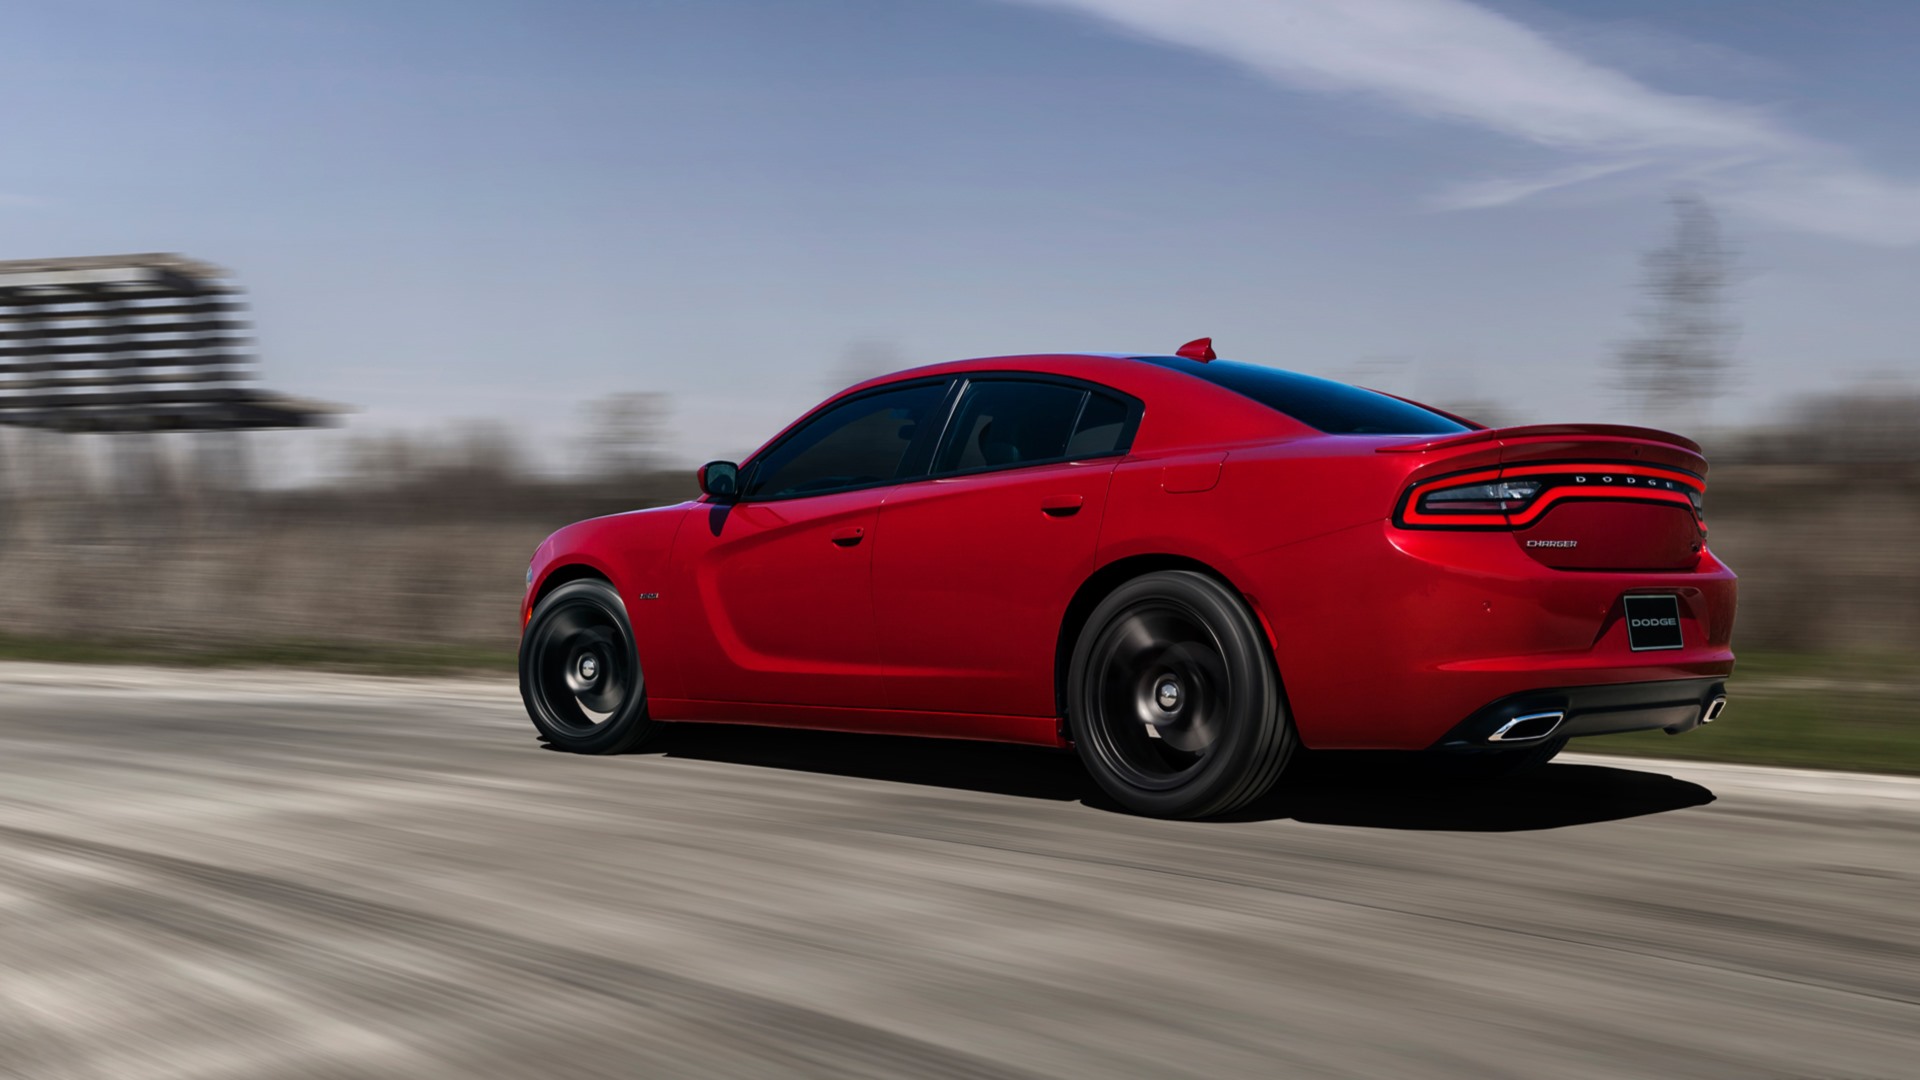 Dodge Charger HD Wallpaper | Background Image | 1920x1080